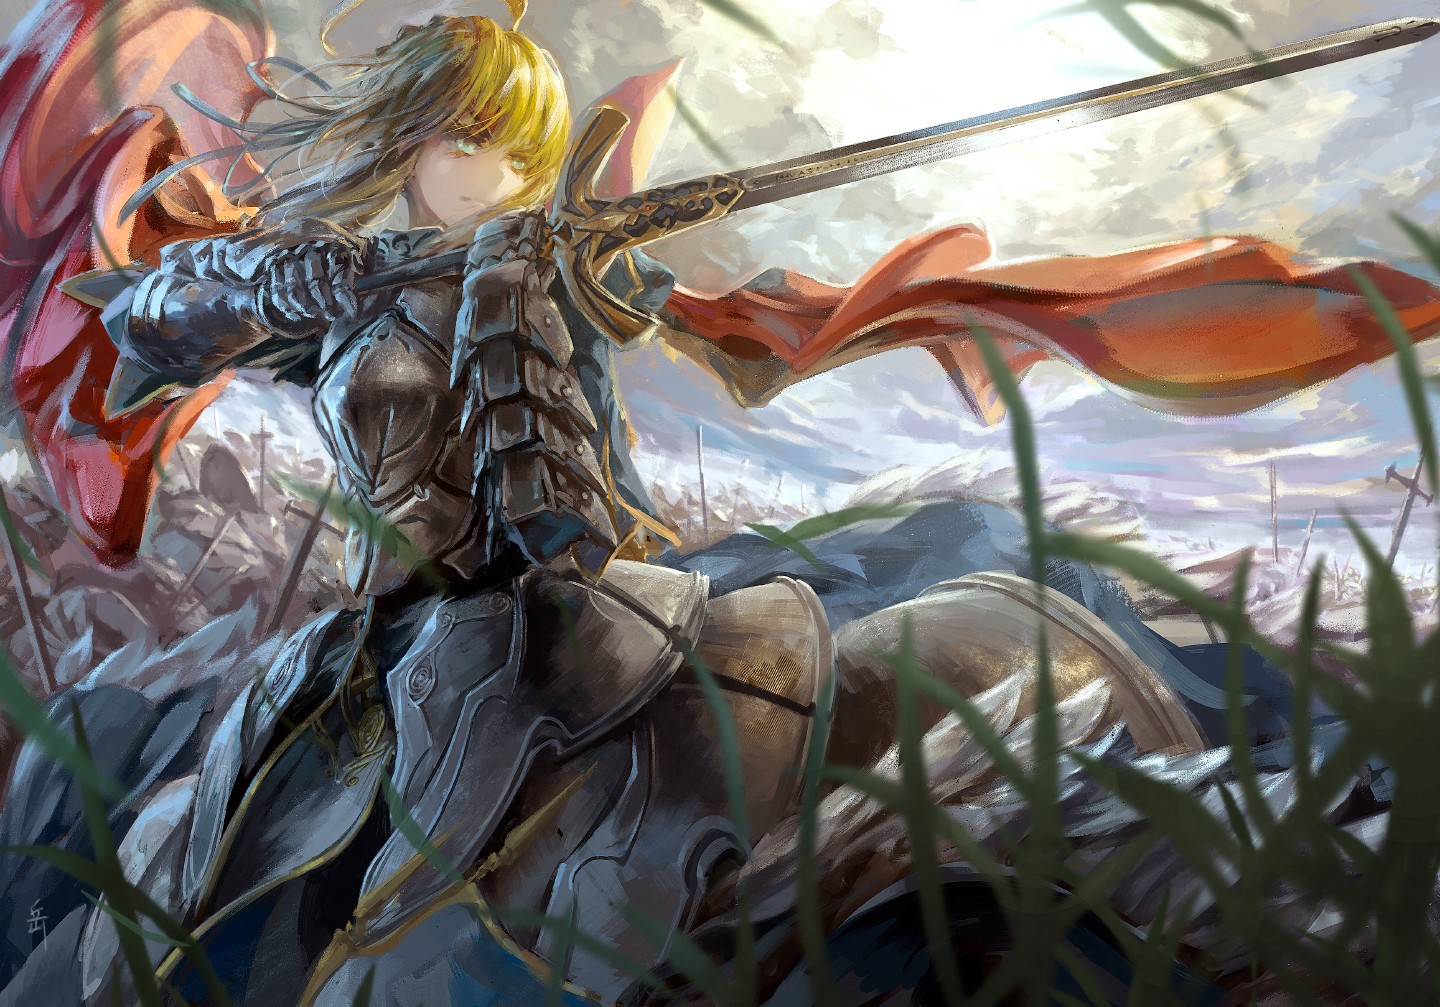 blondes, Fate stay, Night, Knights, Grass, Weapons, Green, Eyes, Armor, Short, Hair, Type moon, Warriors, Capes, Saber, Fate zero, Skyscapes, Swords, Fate, Series Wallpaper